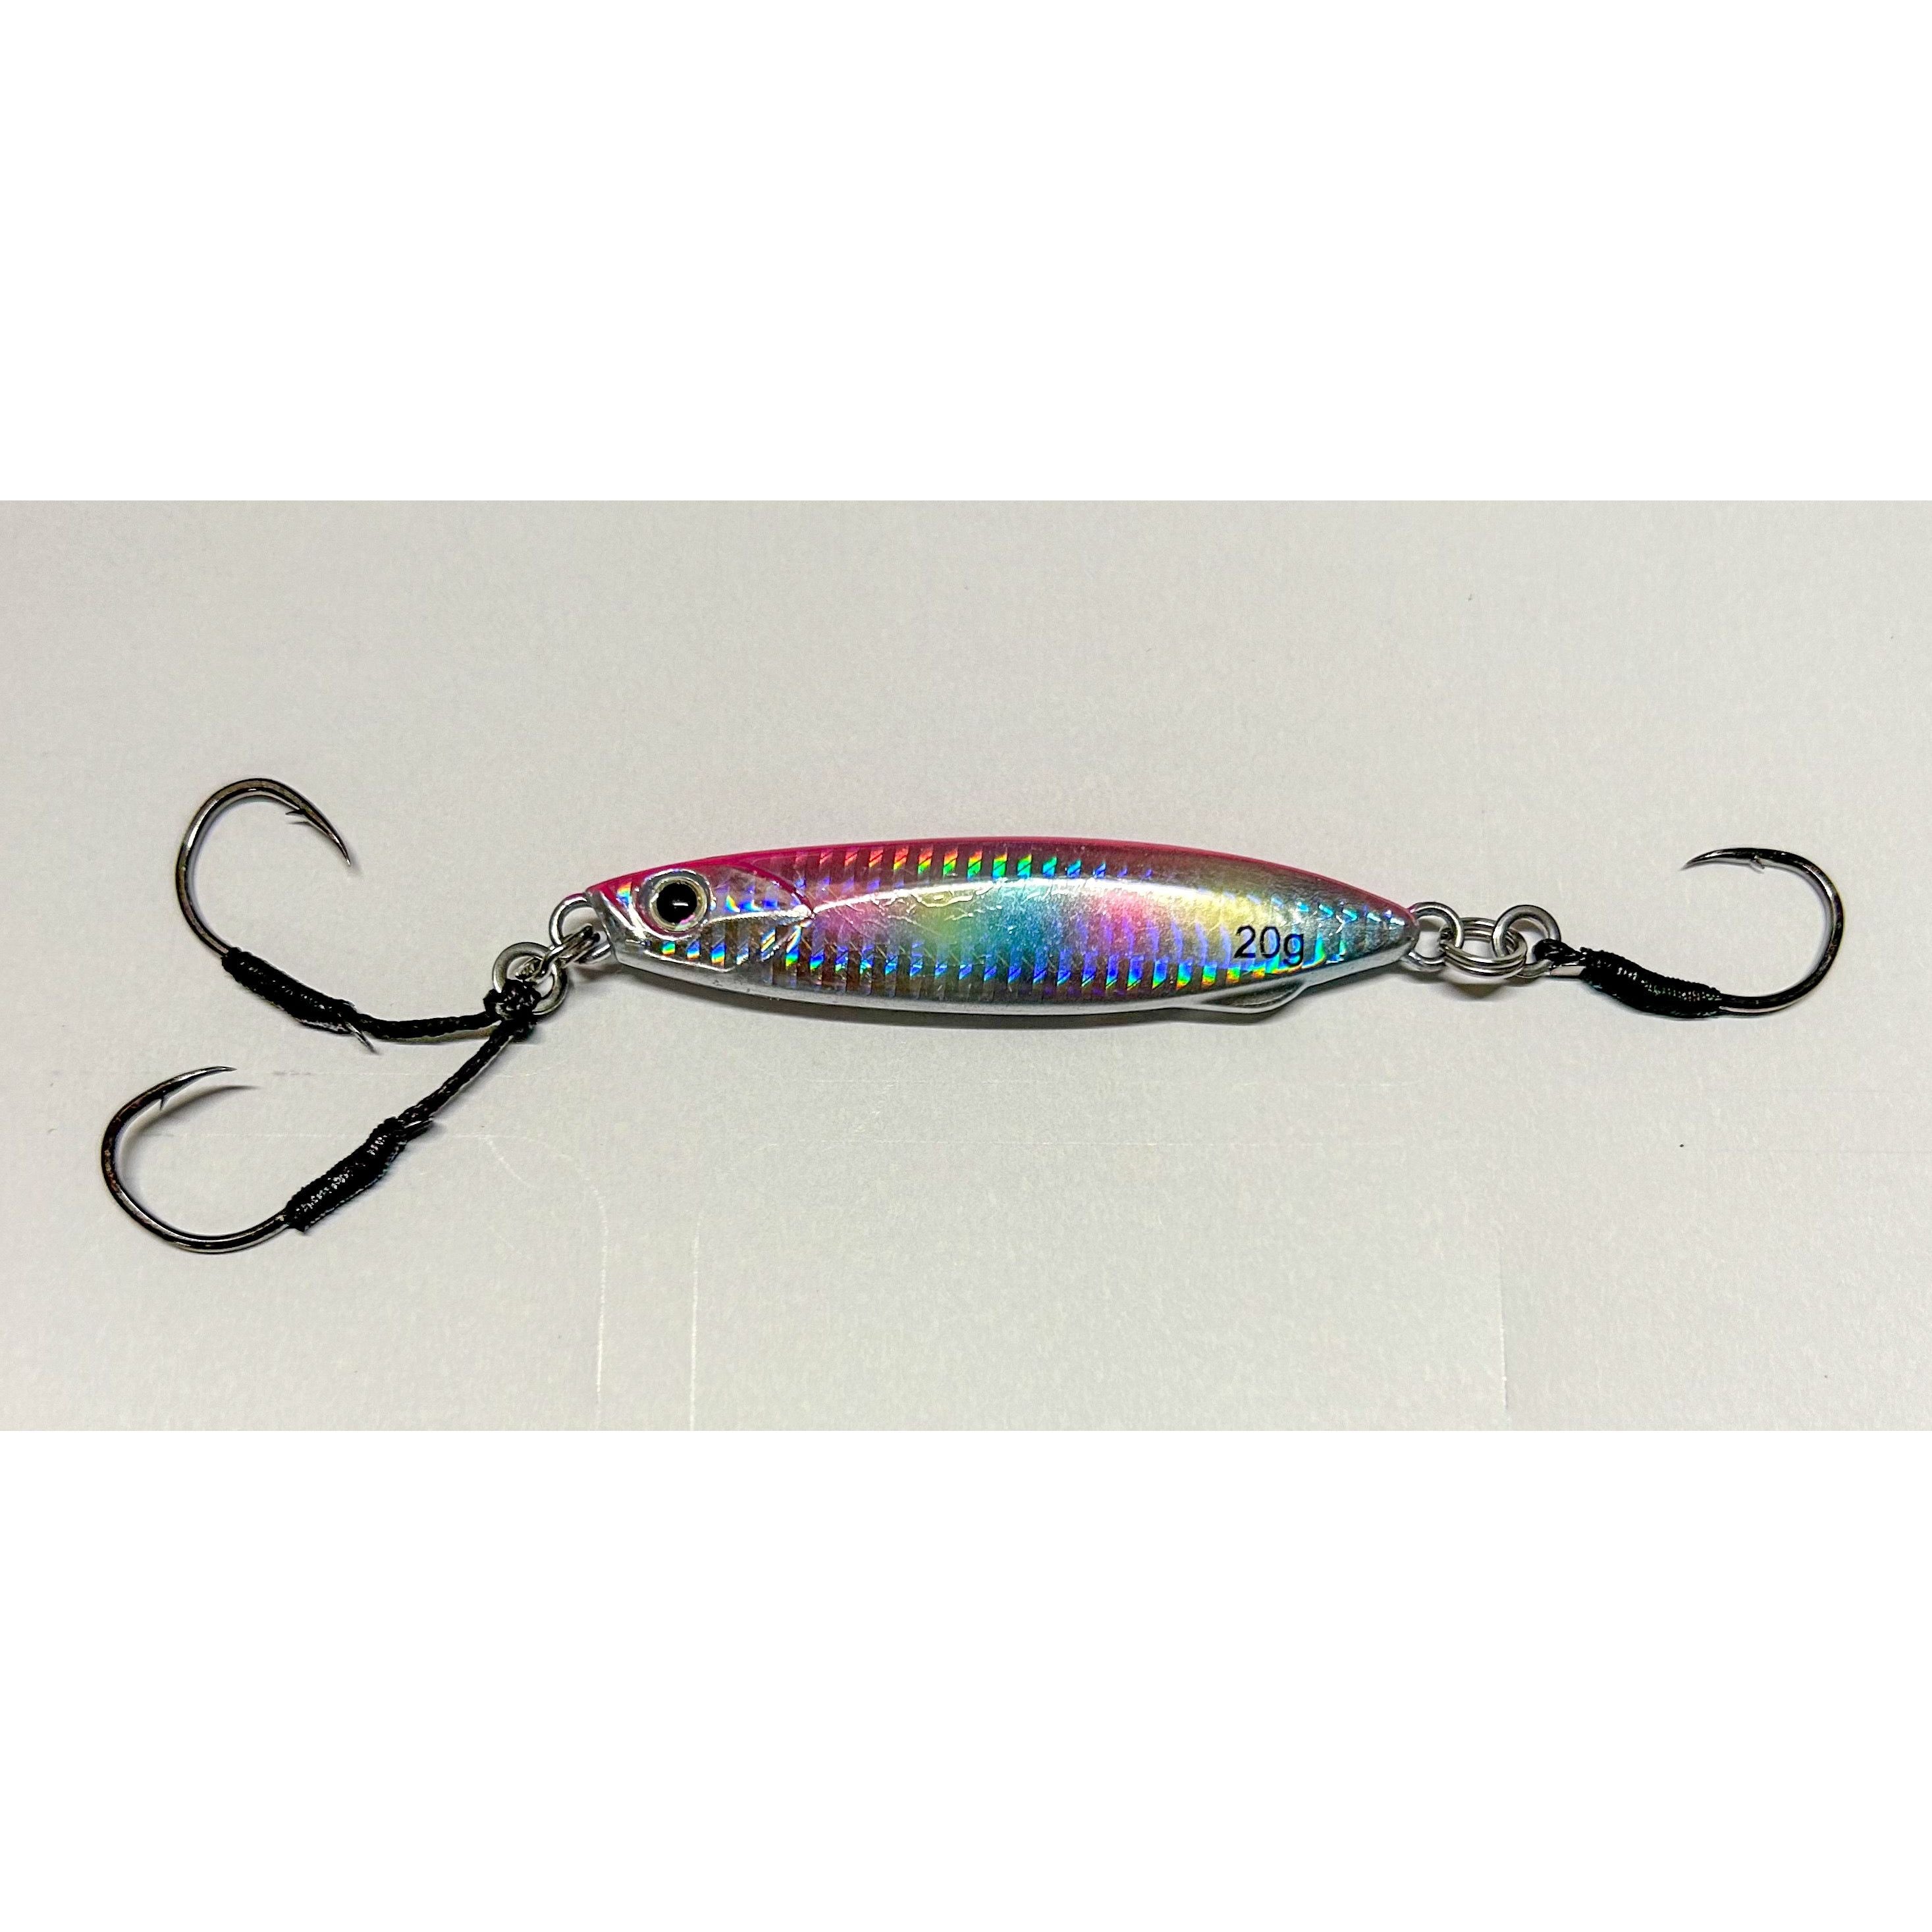 Small Slow Jigs 60mm (20g & 30g)